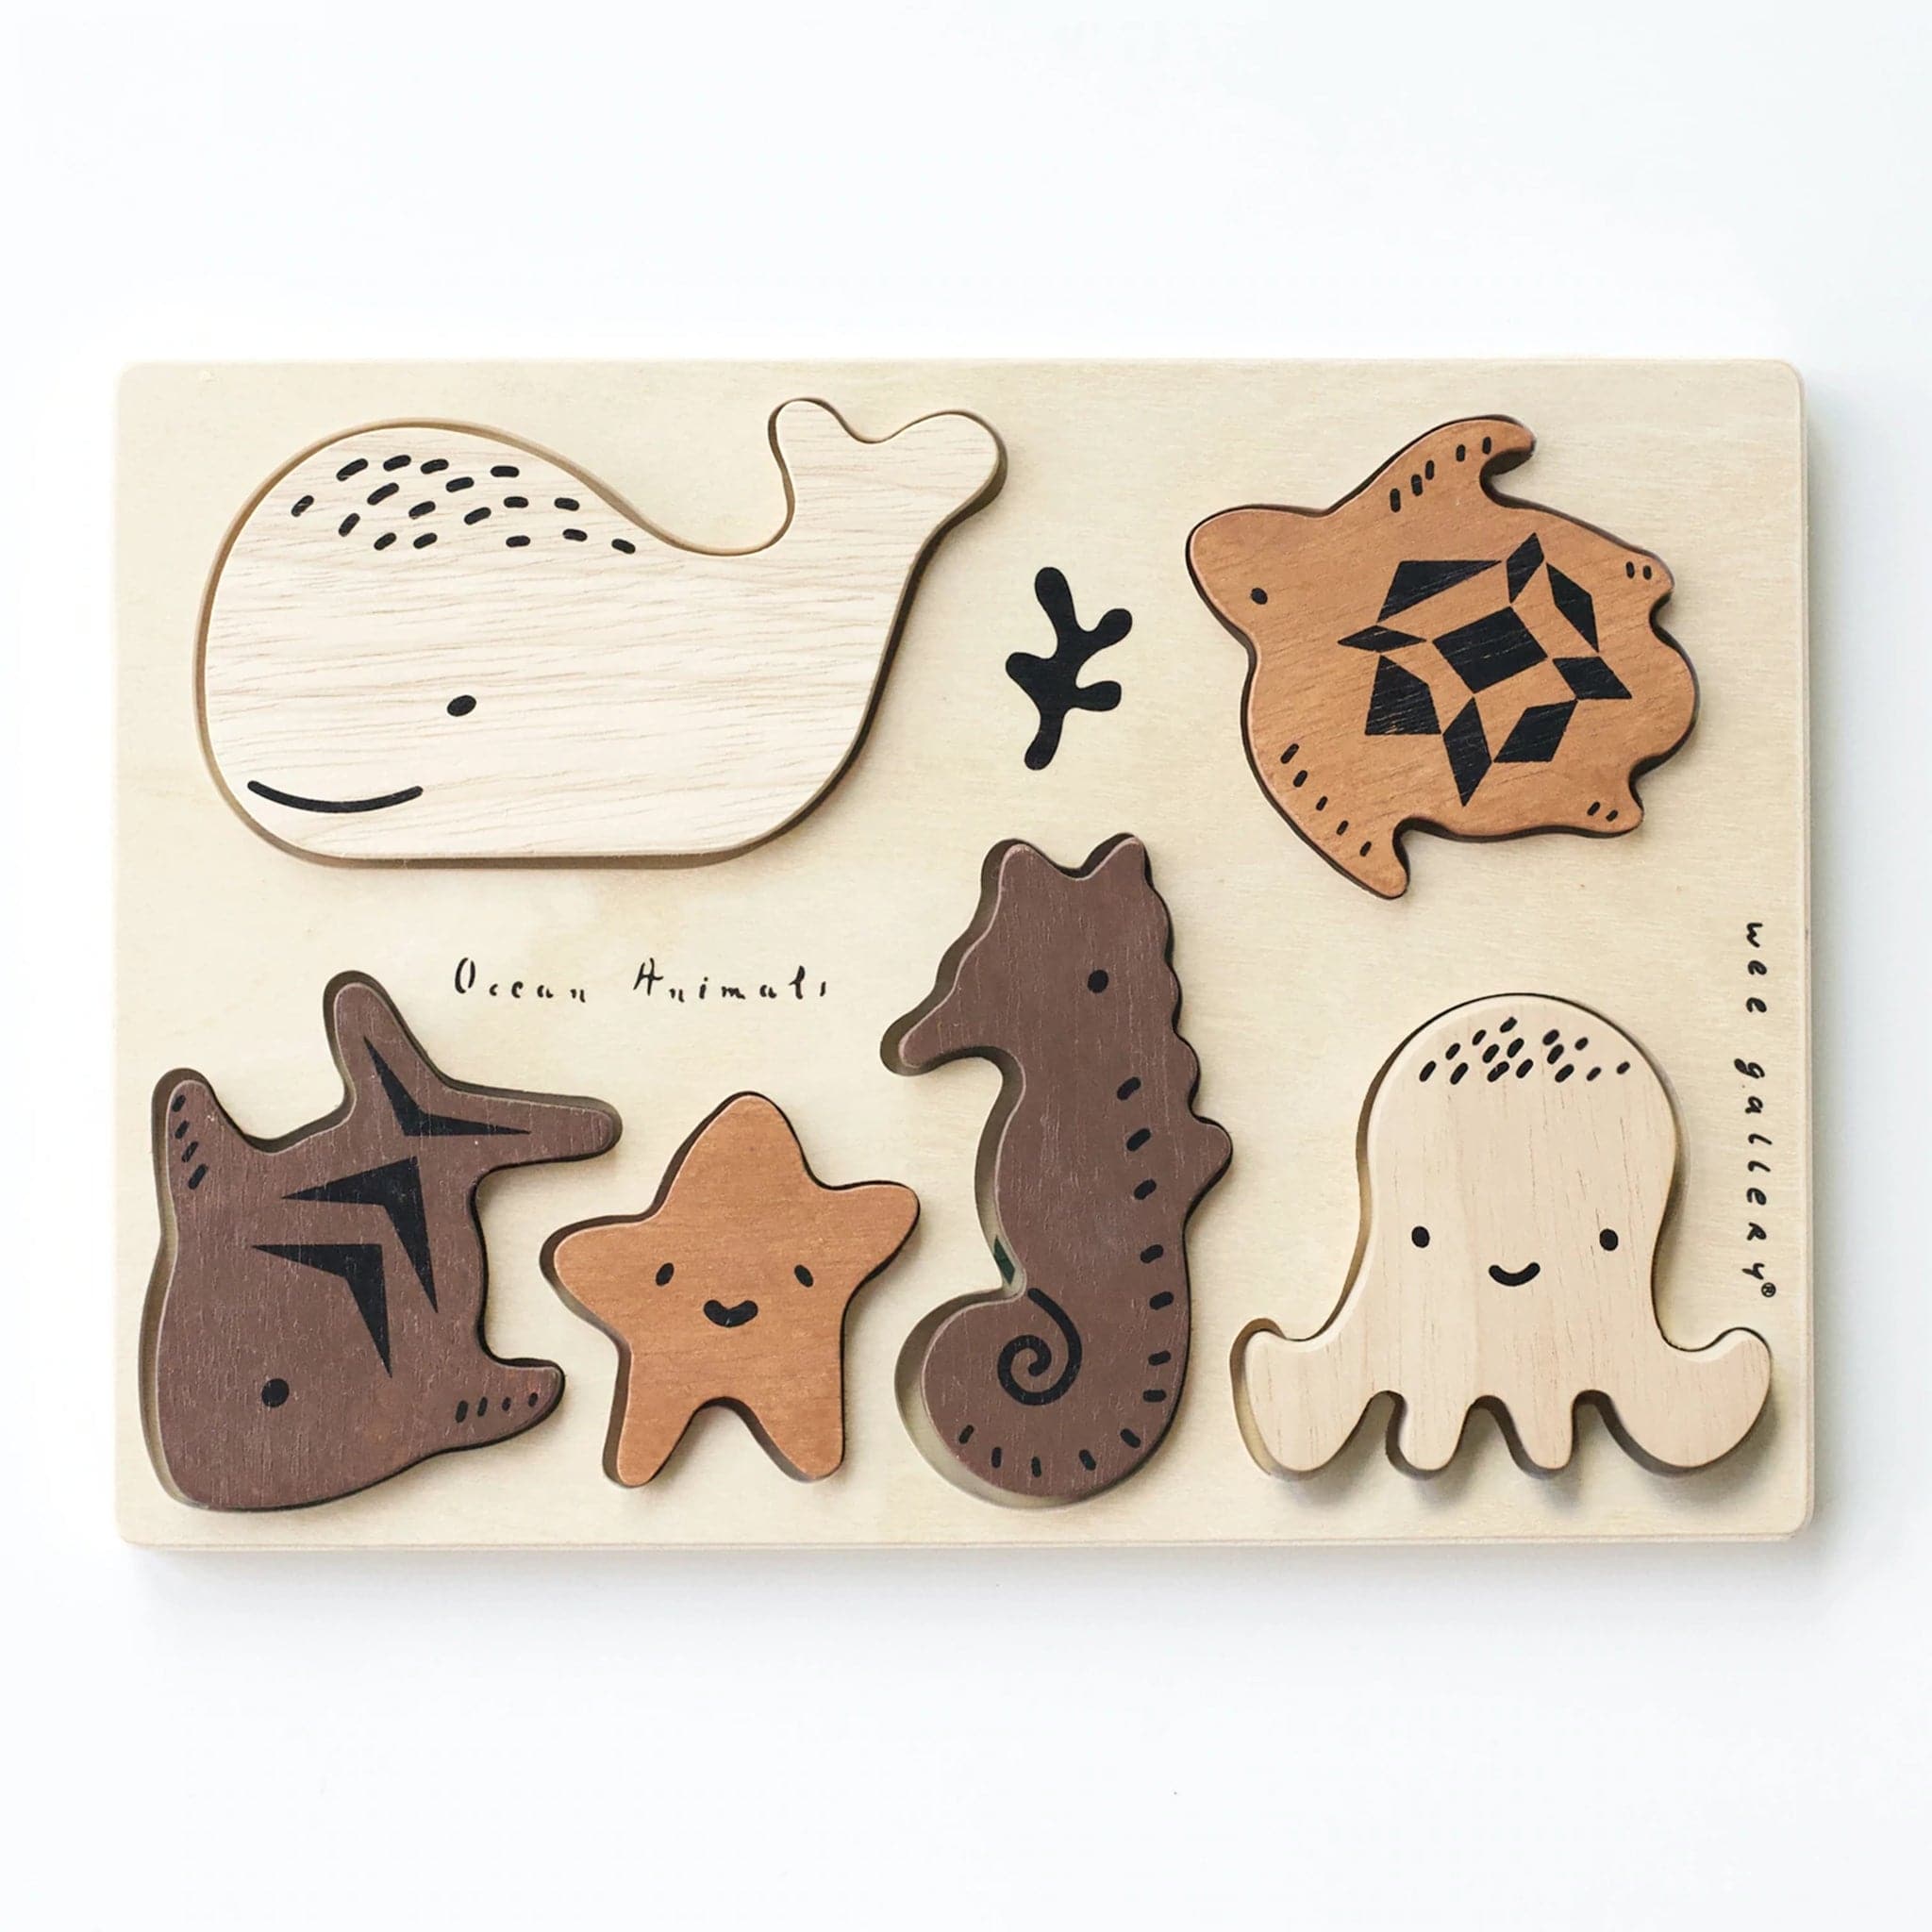 Sweet sea creatures scattered around their puzzle board. There is a starfish, octopus, sea horse, turtle, fish, and whale. Each puzzle piece is wooden and a different color wood. There are shapes matching each creature for a little one to fit perfectly in.